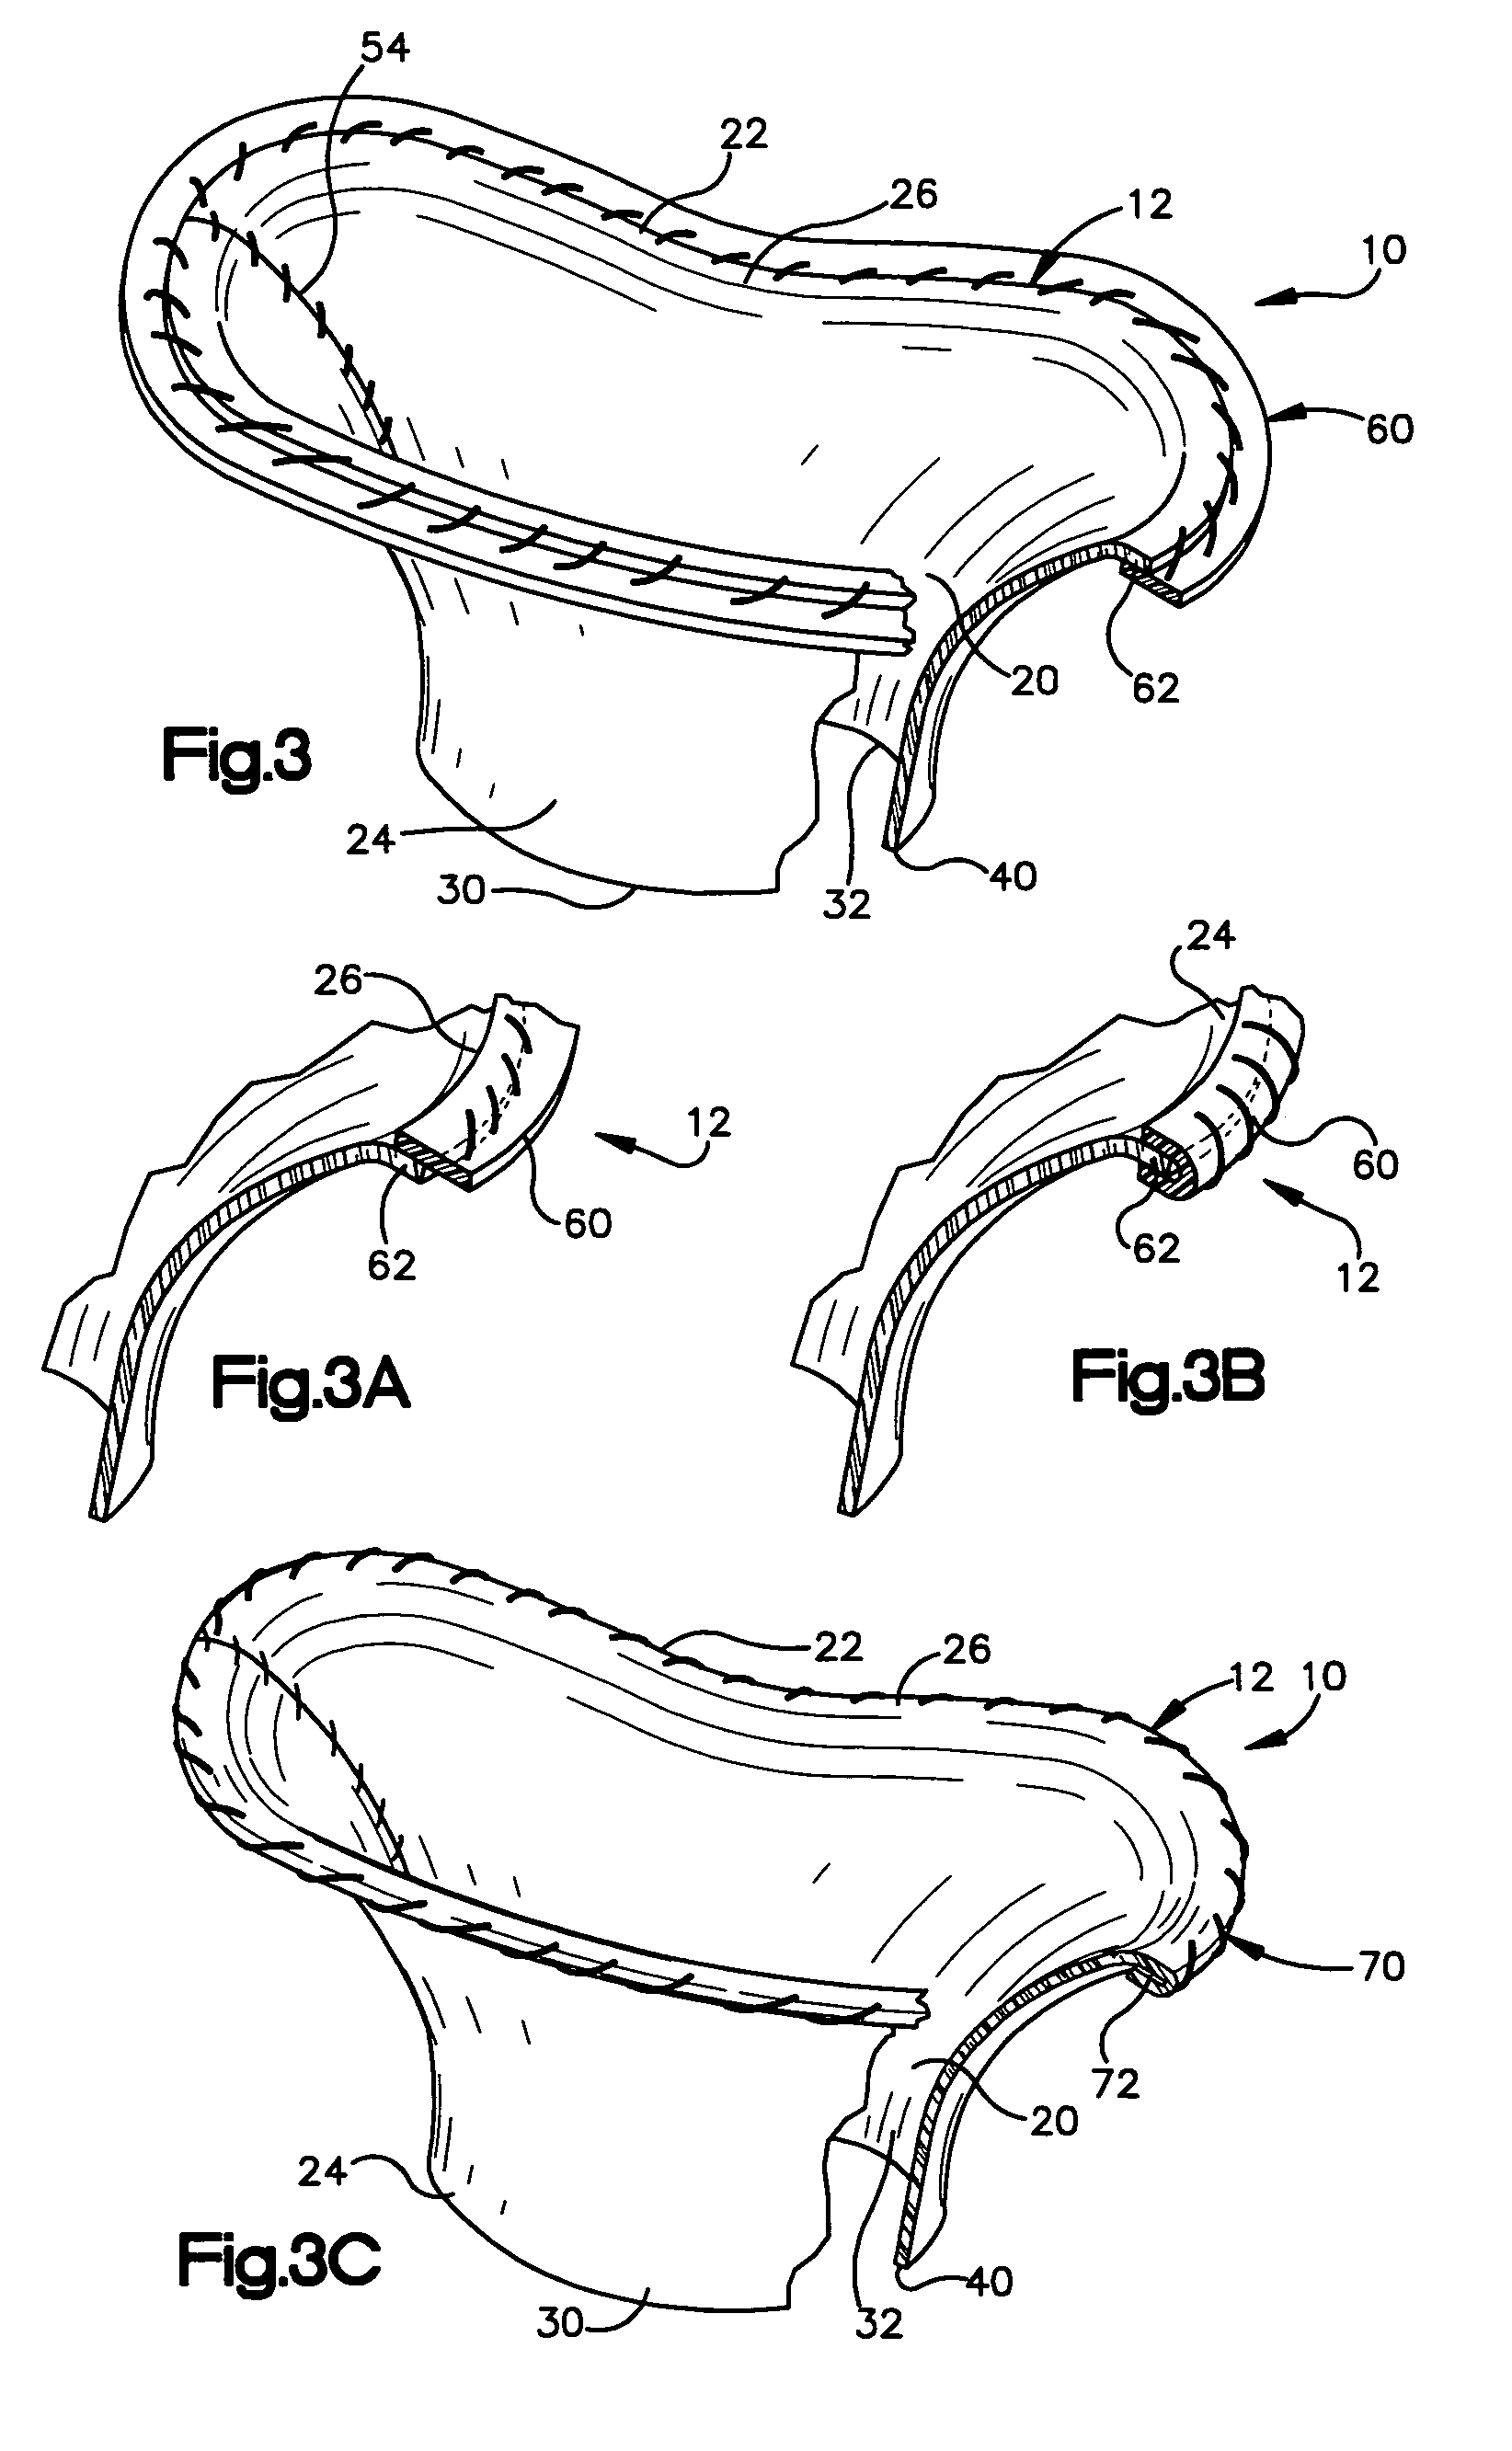 Method and apparatus for replacing a mitral valve with a stentless bioprosthetic valve